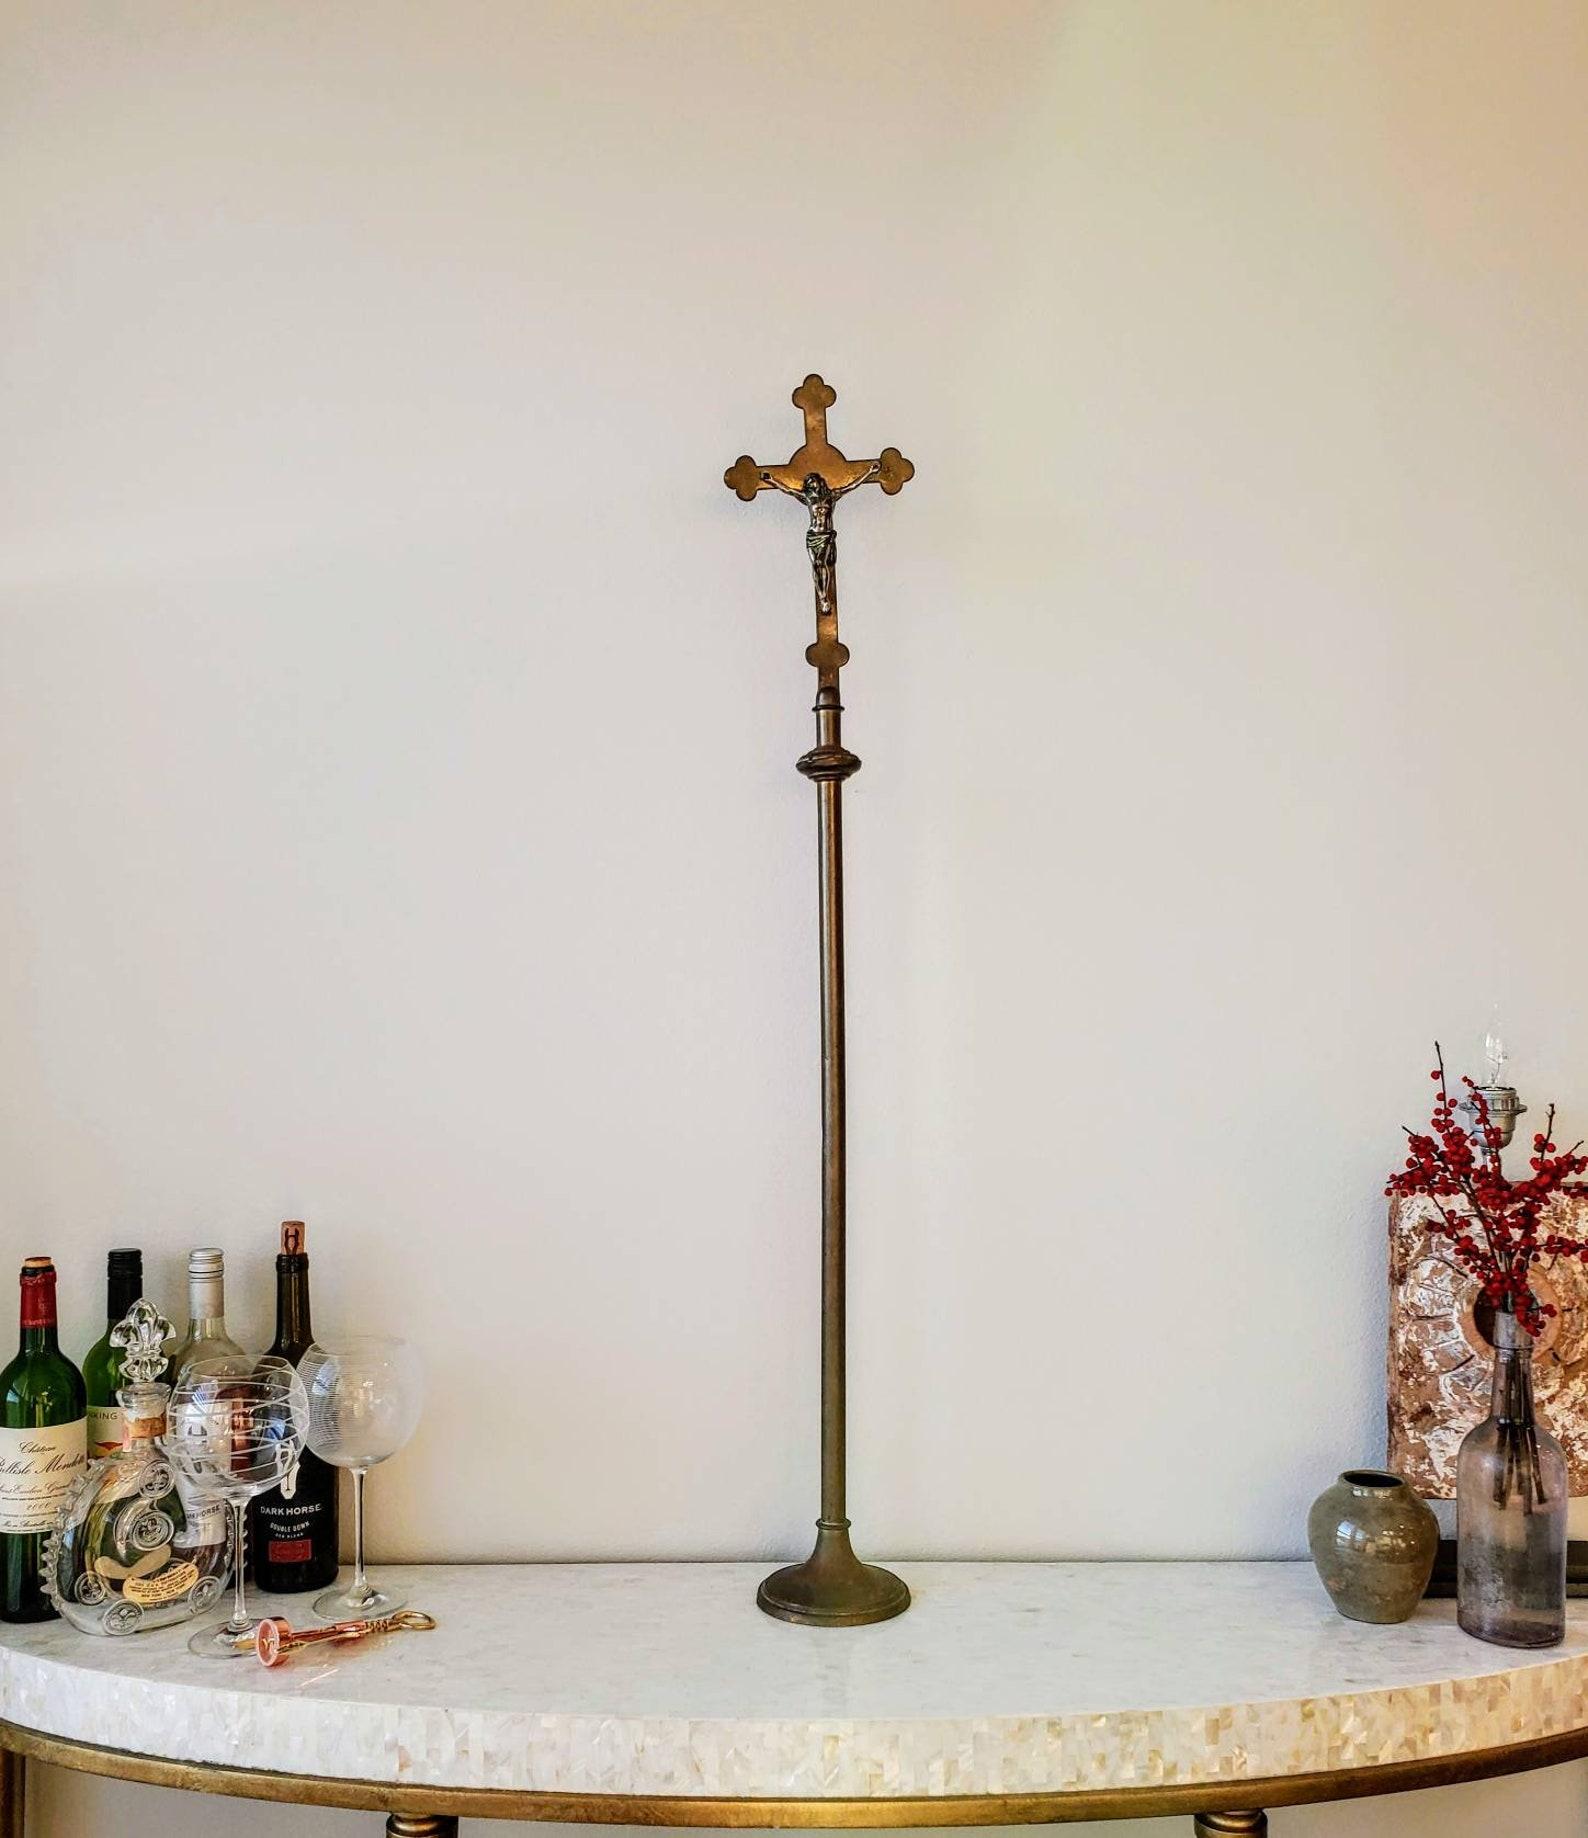 An authentic antique brass church processional cross - altar crucifix with beautiful, elegantly aged patina. Born in the late 18th to 19th century, richly detailed sculpted silver Corpus Christi (body of Christ) figure with gilt remnants remaining,